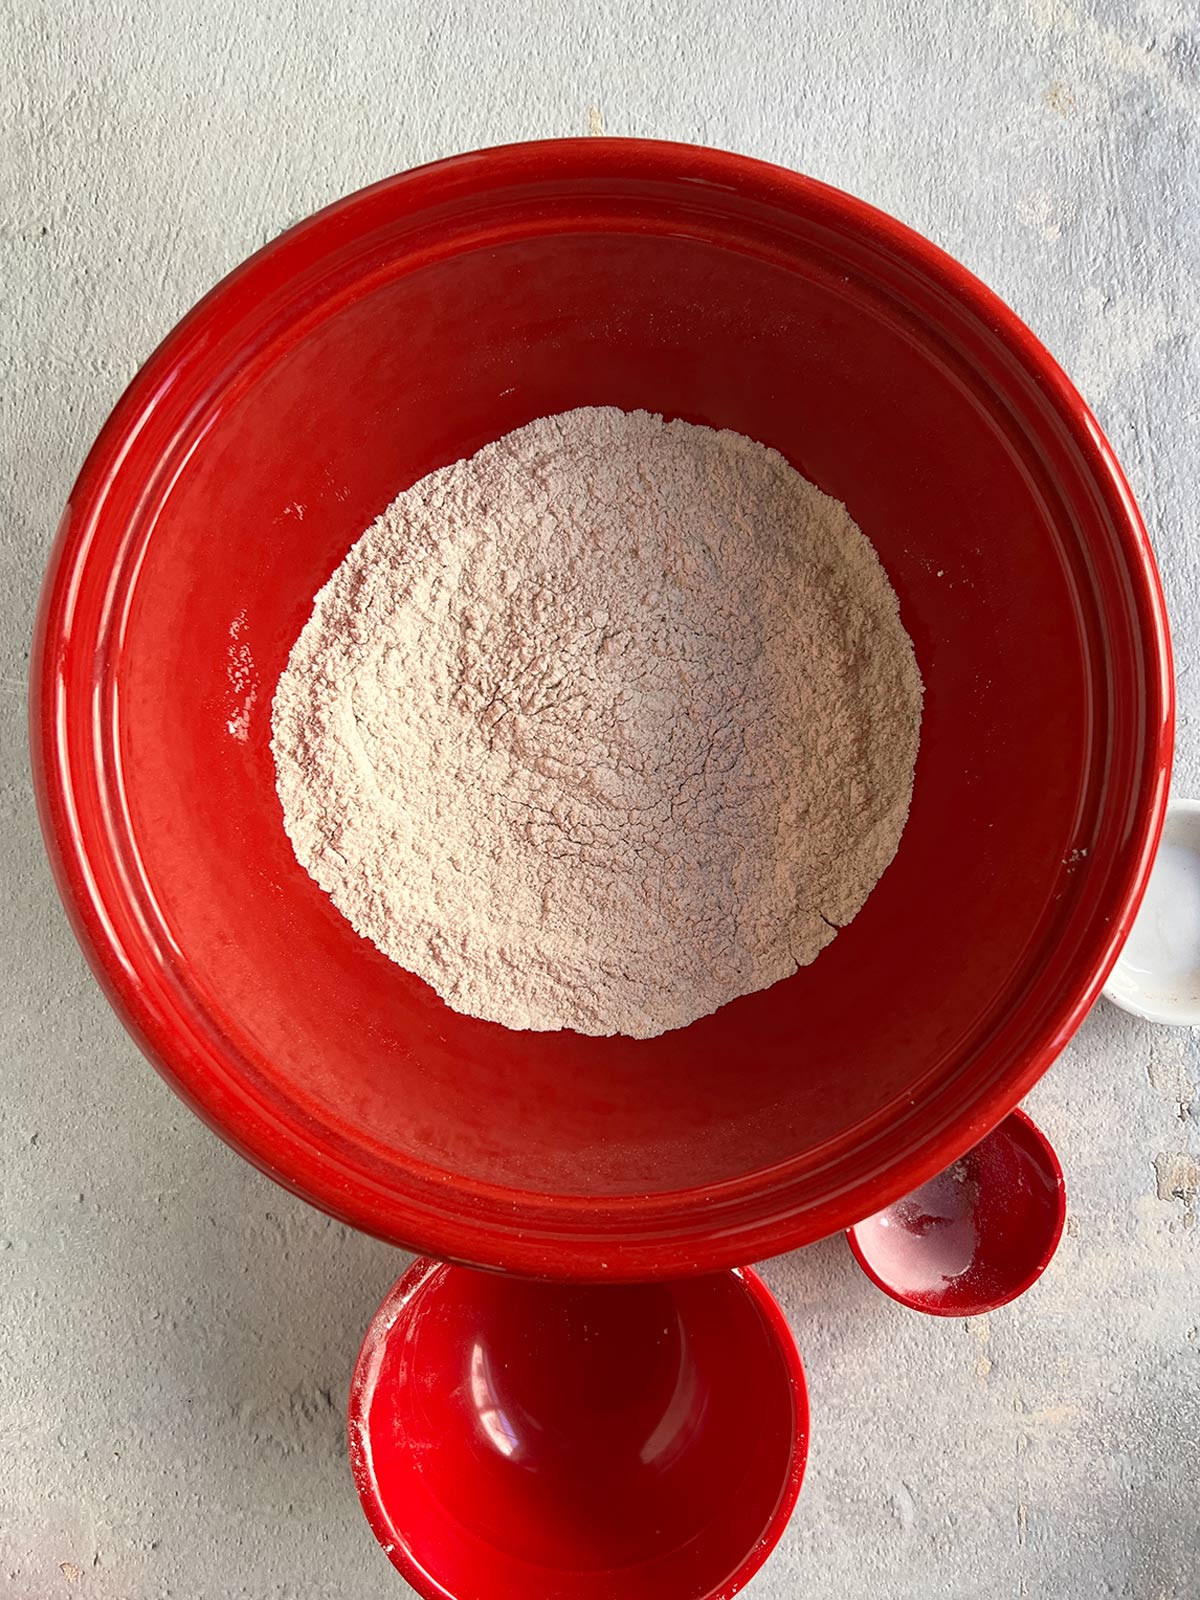 Dry ingredients whisked in a big red bowl with small bowls around it.